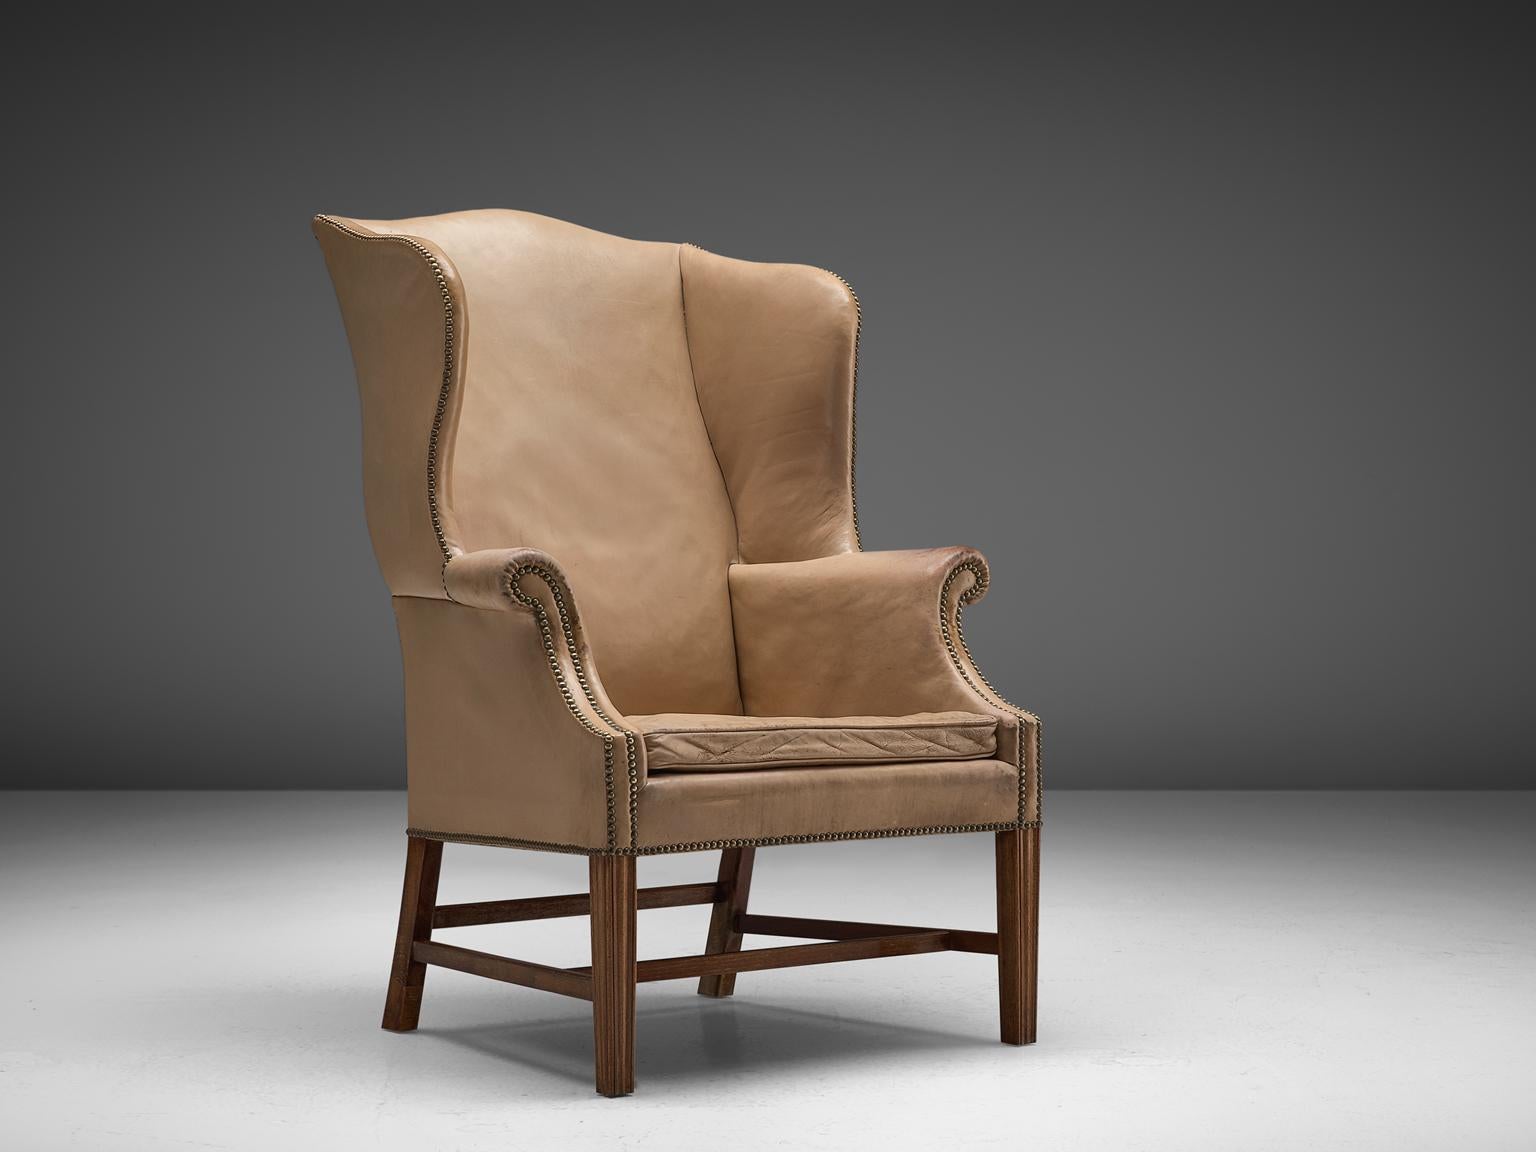 Early Peter Hvidt & Orla Mølgaard Nielsen, wingback chair, patinated leather, mahogany and brass, Denmark, 1940s

Danish wingback chair with a classic design, by Peter Hvidt & Orla Mølgaard Nielsen in the 1940s. This ornate, royal lounge chair is